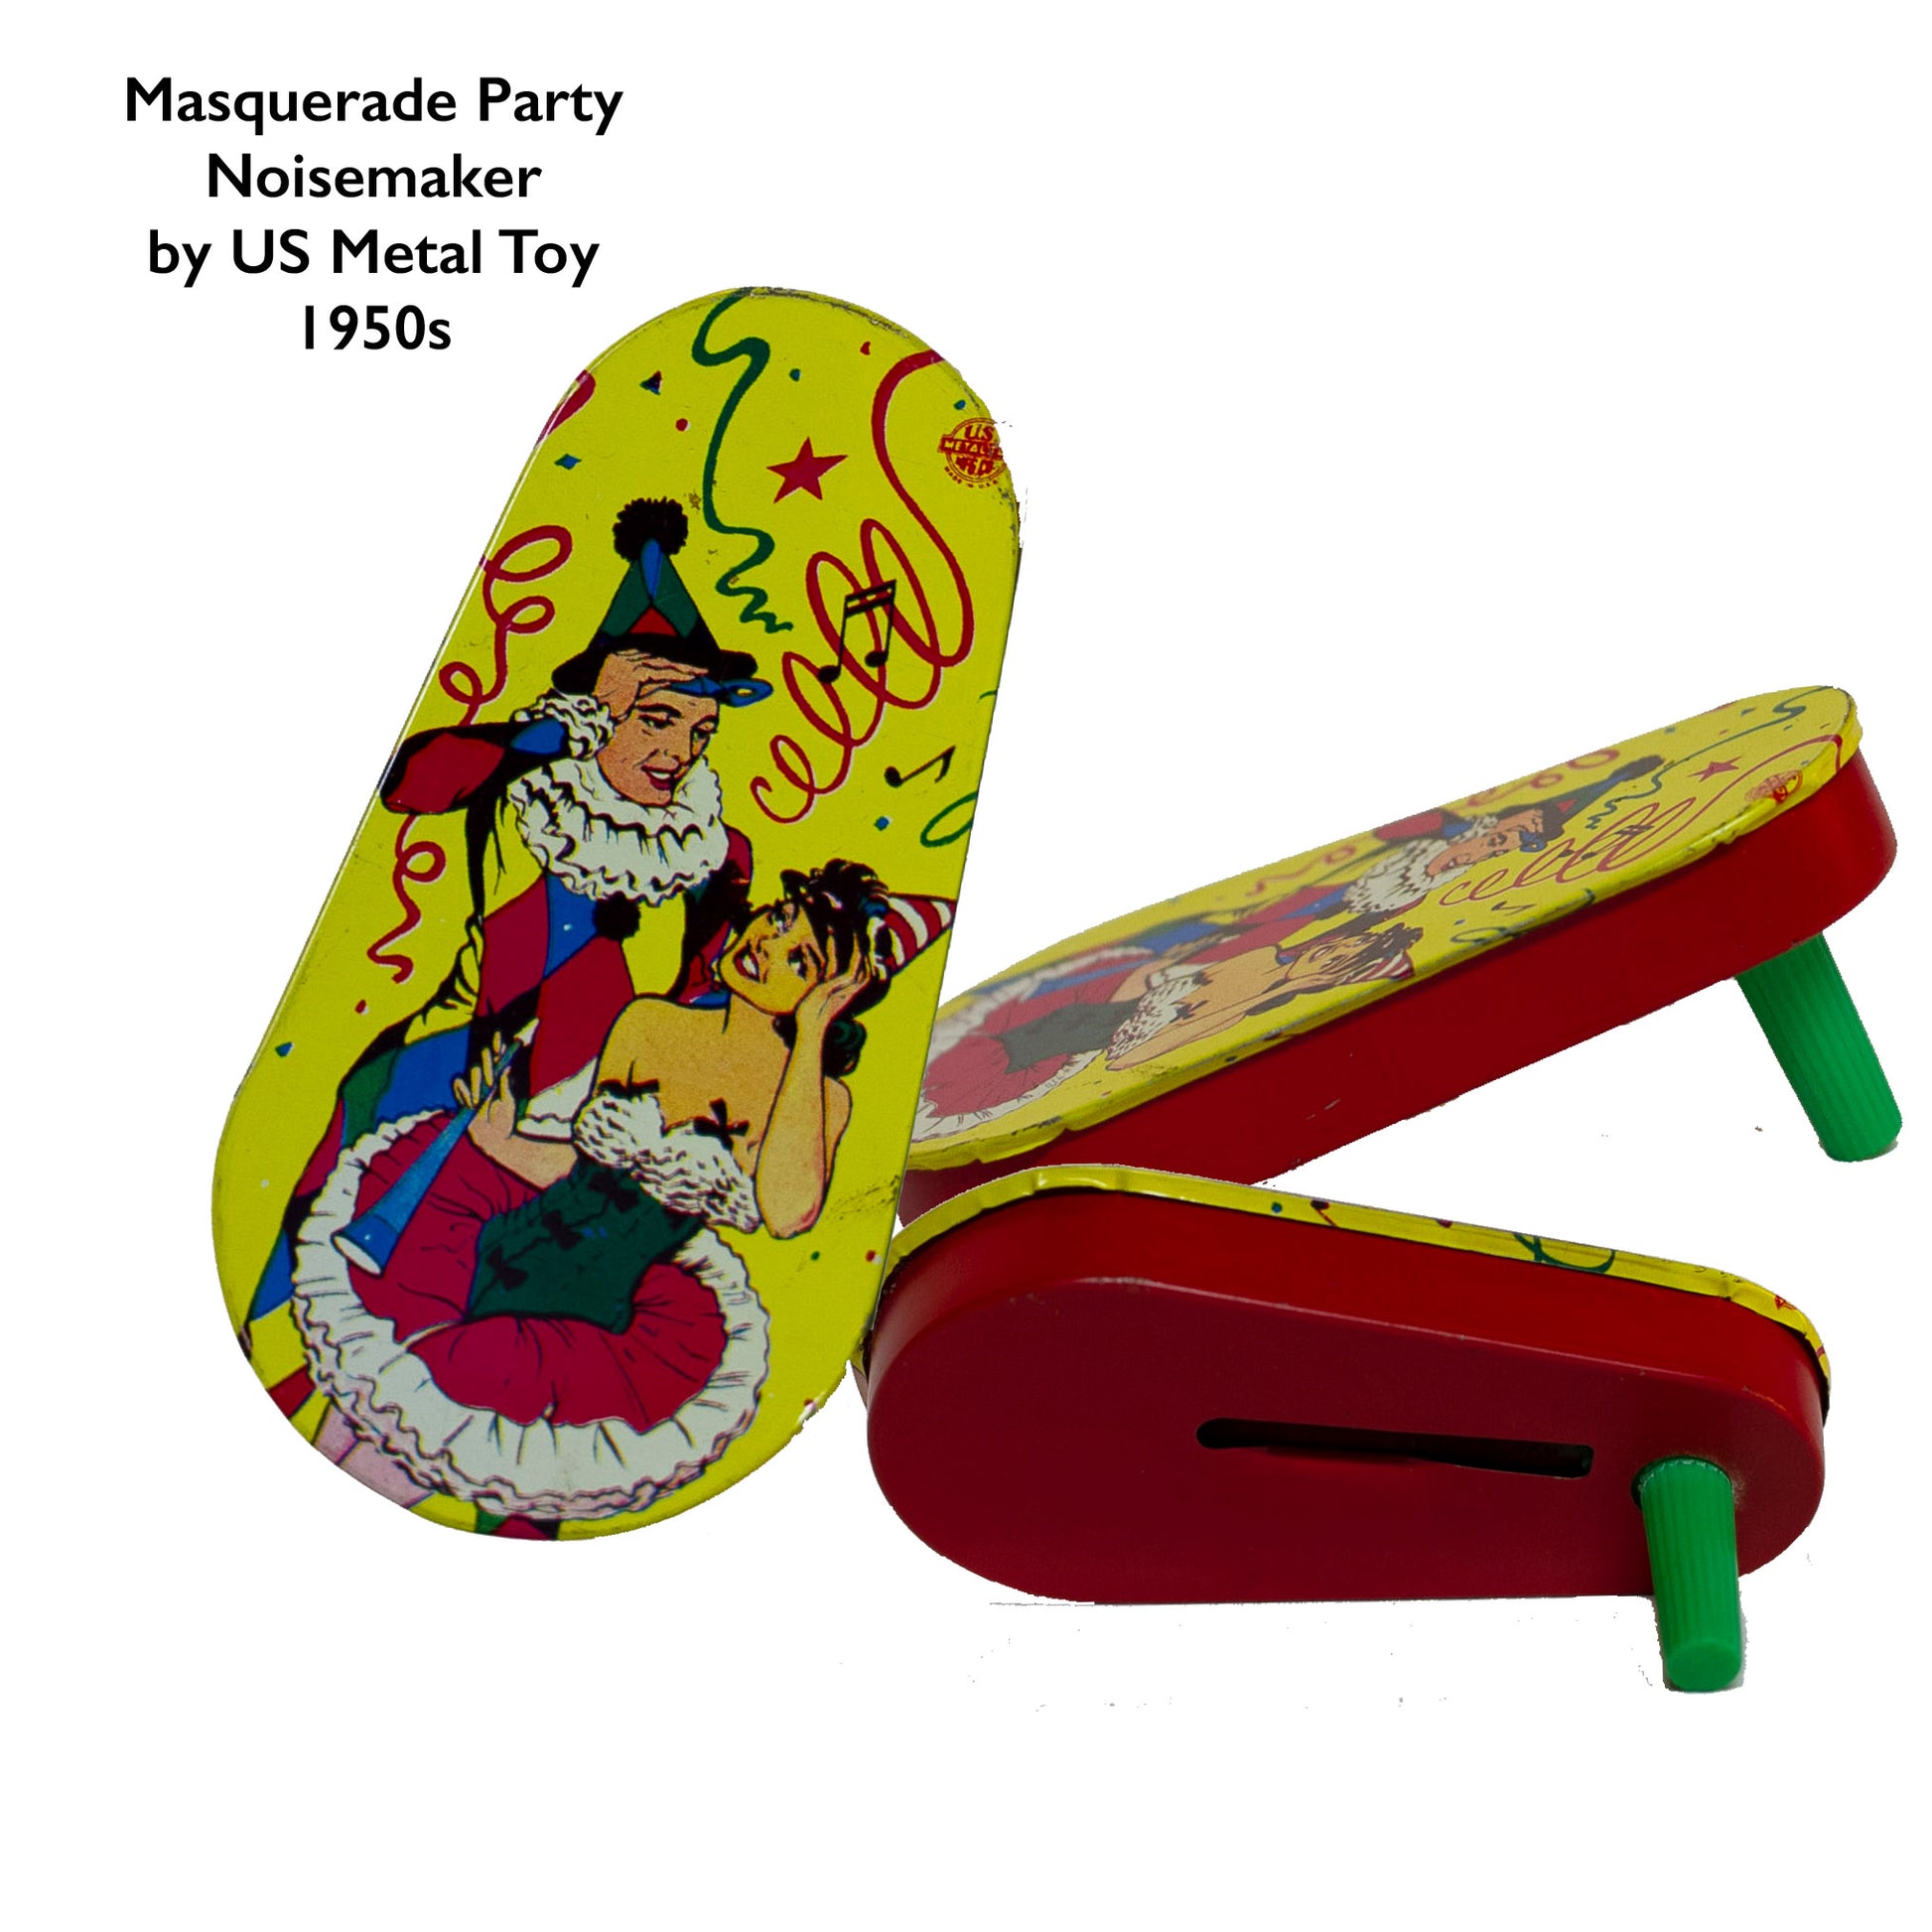 TIN-LITHOGRAPH RATCHET-STYLE MASQUERADE PARTY 1950s NOISEMAKER with green plastic handle by US Metal Toys depicting masquerade dressed couple; the man is dress in a harlequin print jester outfit and the woman in a short cha-cha dress. Lithograph is festive and bright; the background filled with streamers and confetti. 